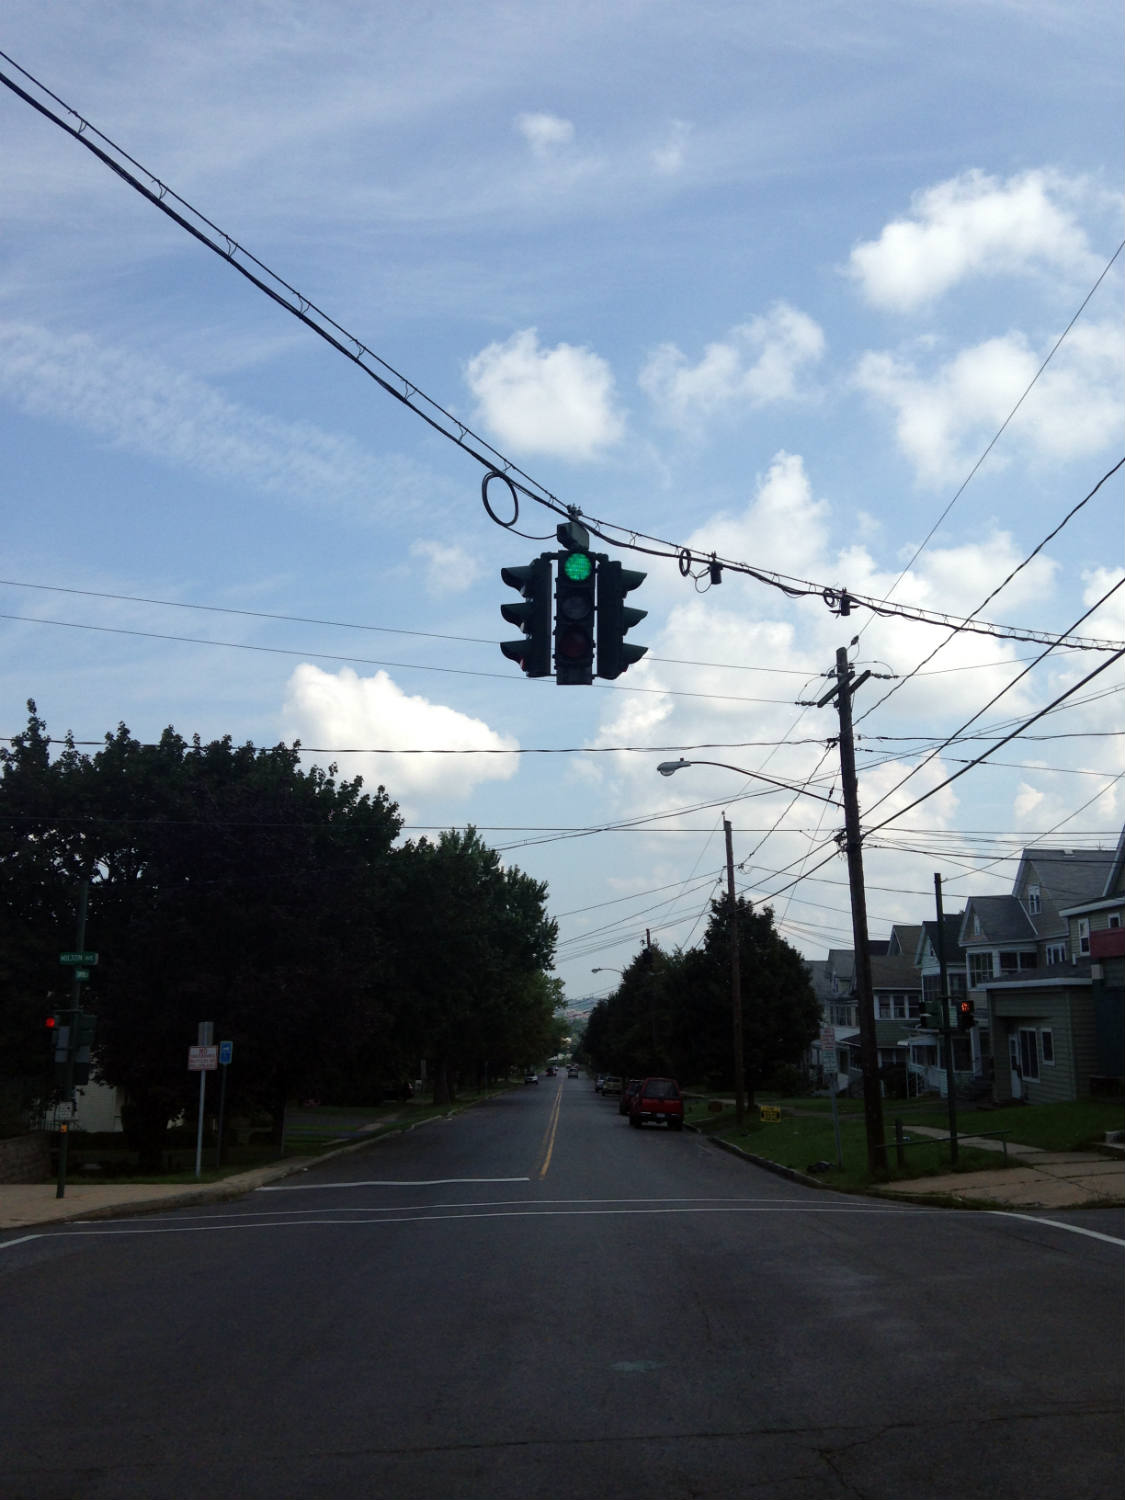 Upside Down Traffic Signal in Tipperary Hill